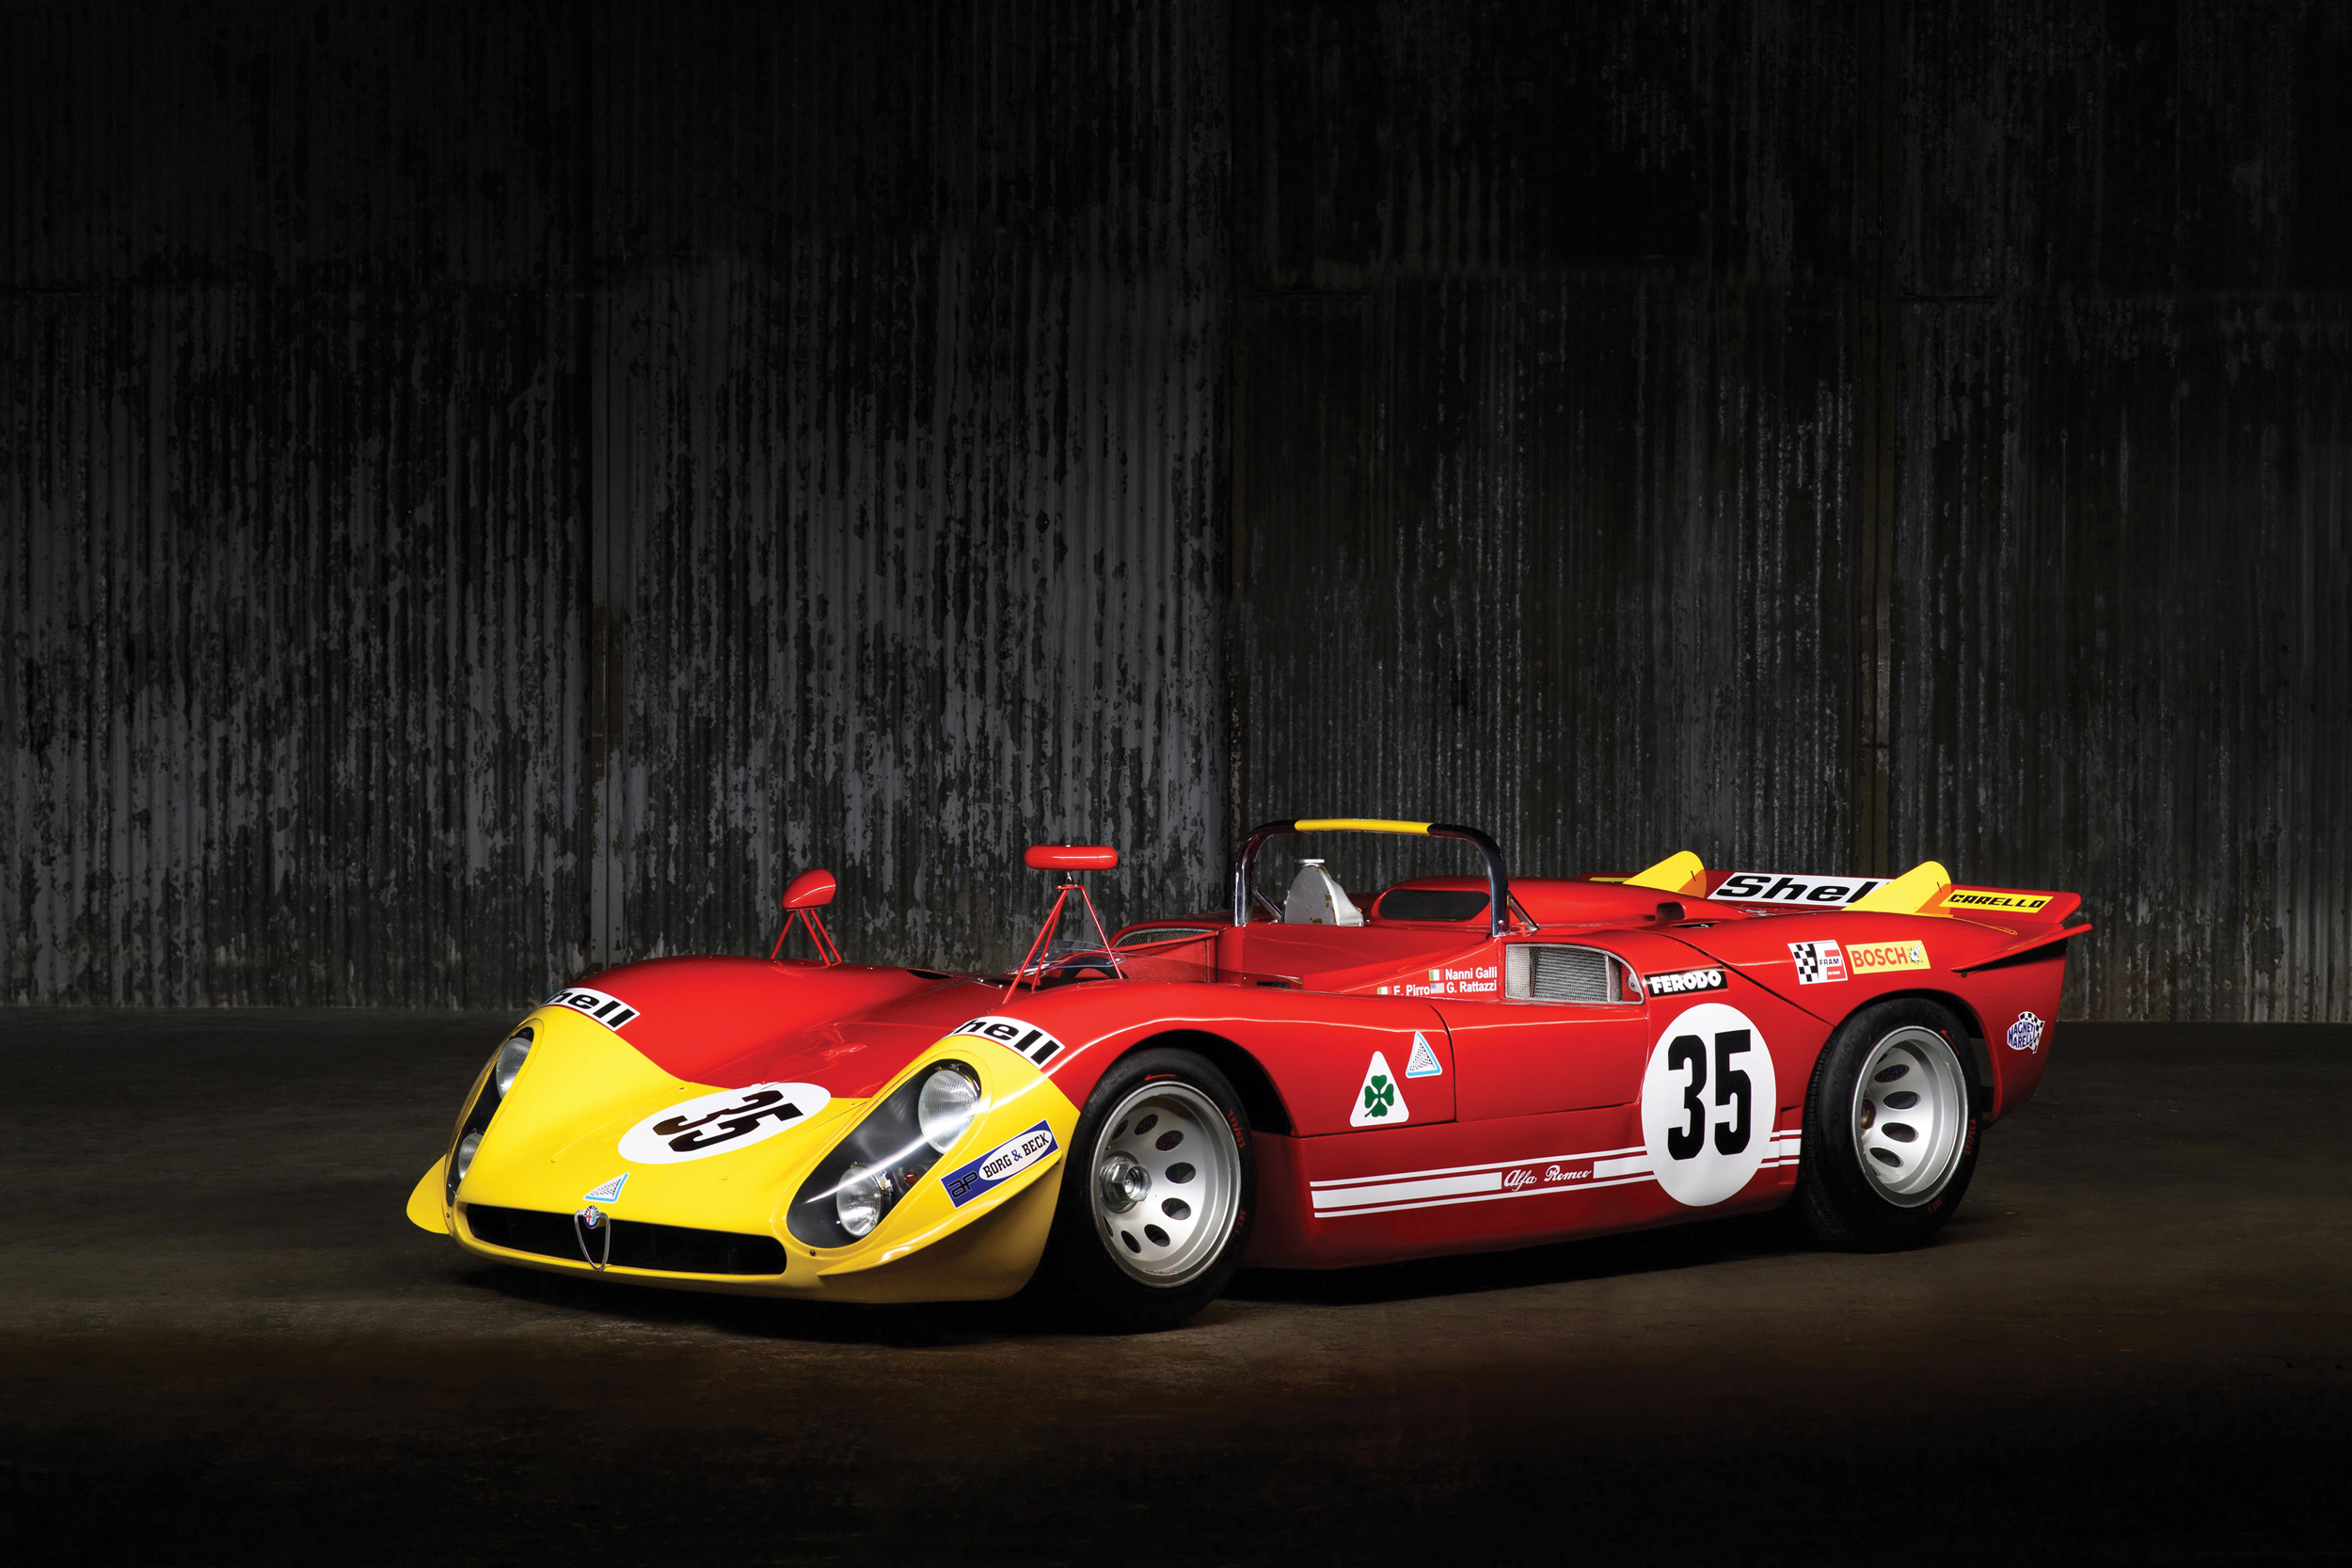 1969 Alfa Romeo Tipo 33/3 (Credit – Tim Scott © 2020 Courtesy of RM Sotheby’s)